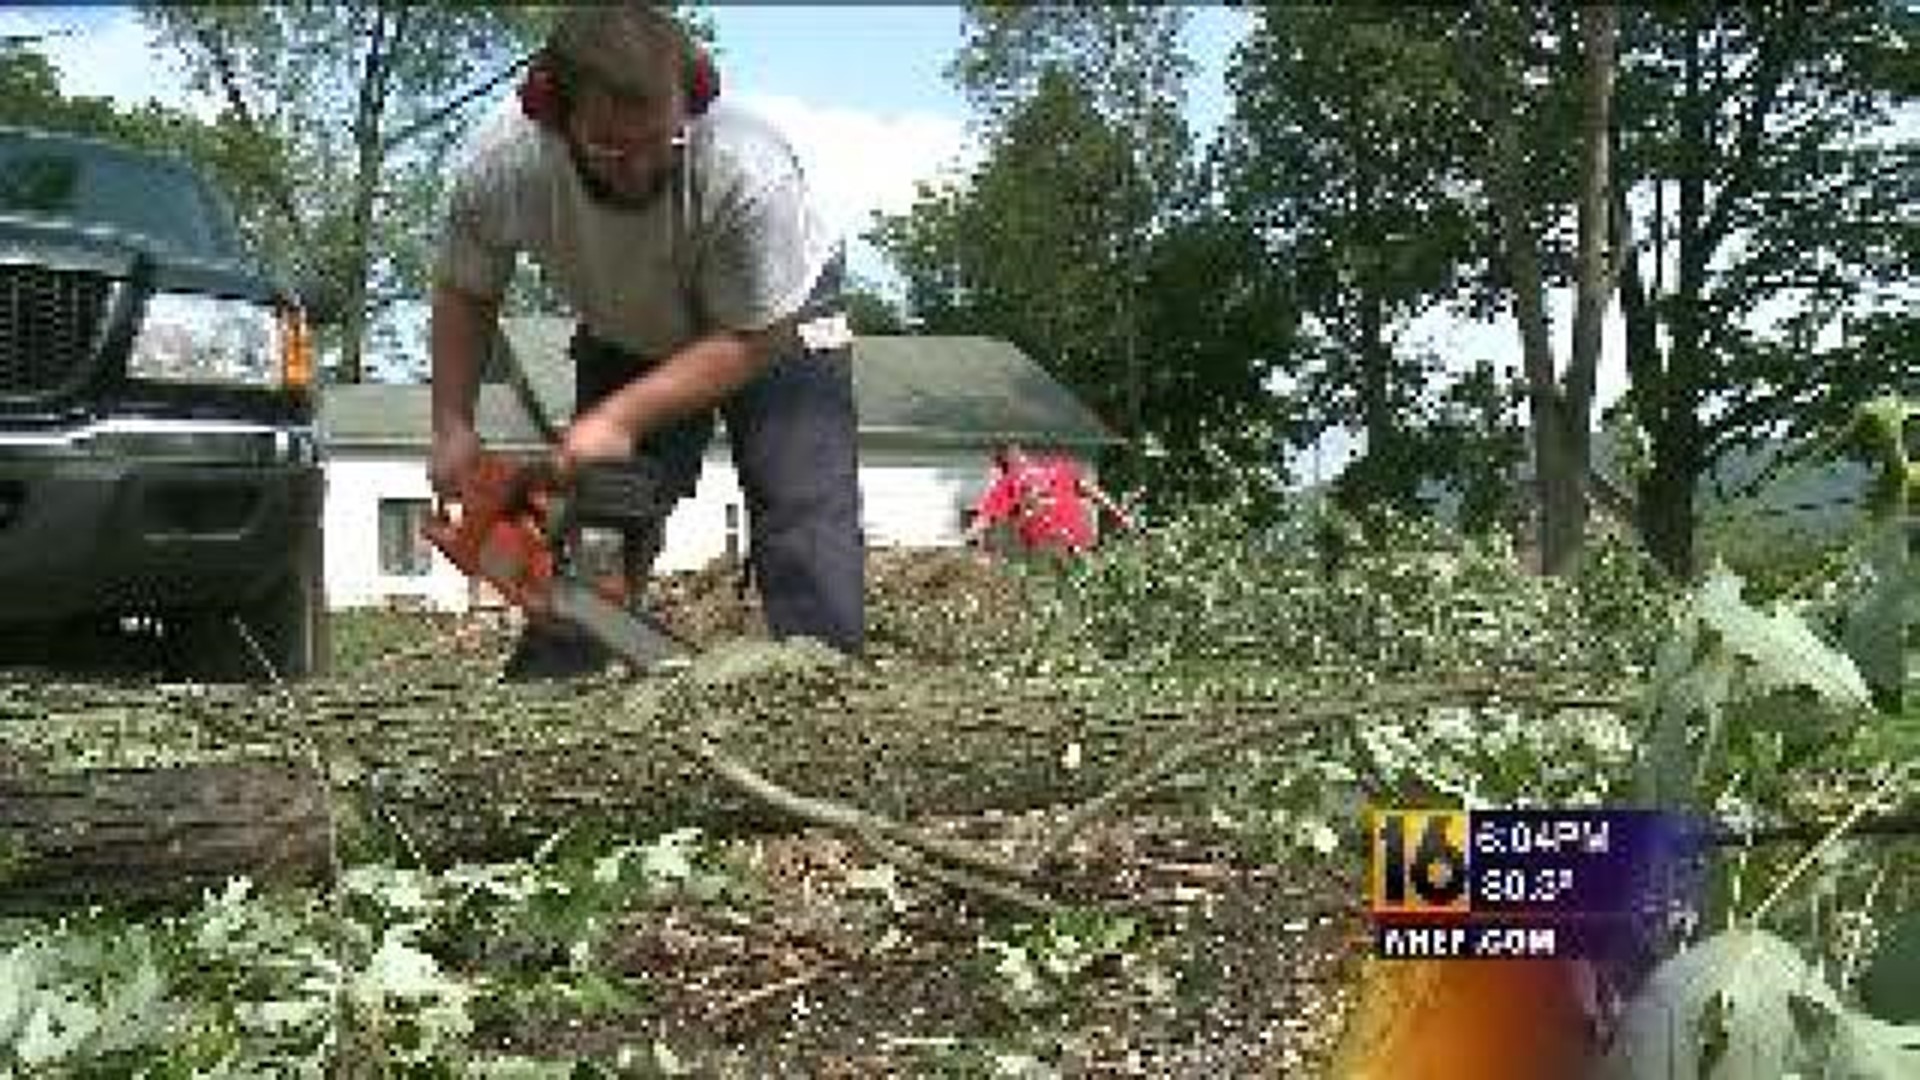 Cleaning Up After the Storm in Susquehanna County